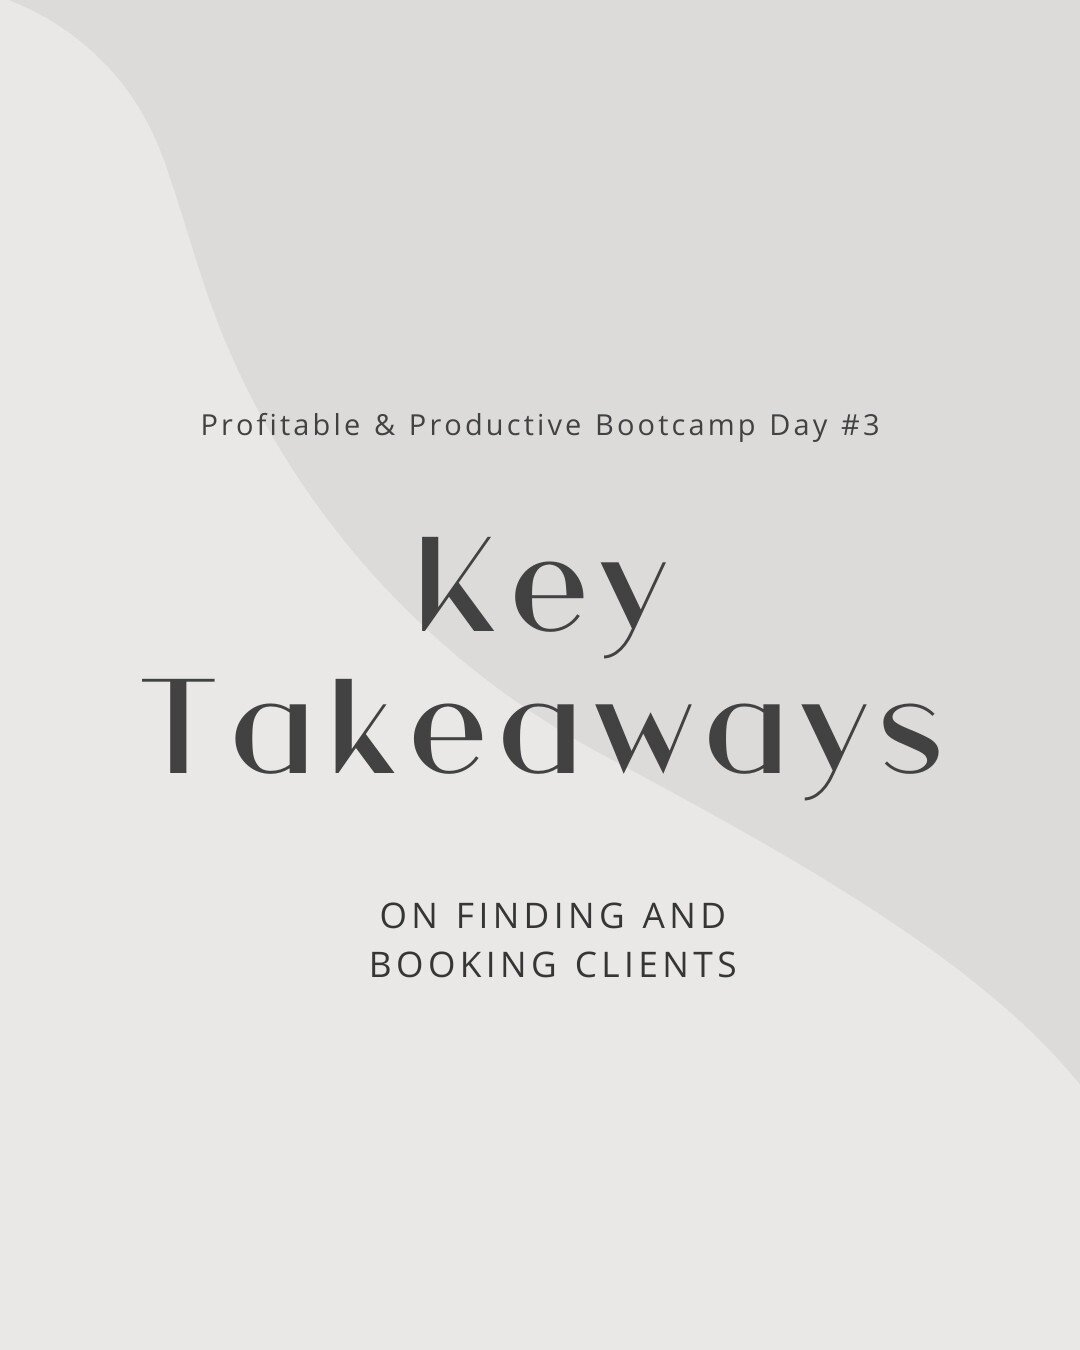 Day #3 of @paigebrunton Profitable &amp; Productive Bootcamp has dropped some great nuggets of wisdom. There are so many that I've added some to my stories as well 😊

Some of the key takeaway moments from the 'Finding Clients' talk was:

01.  Don't 